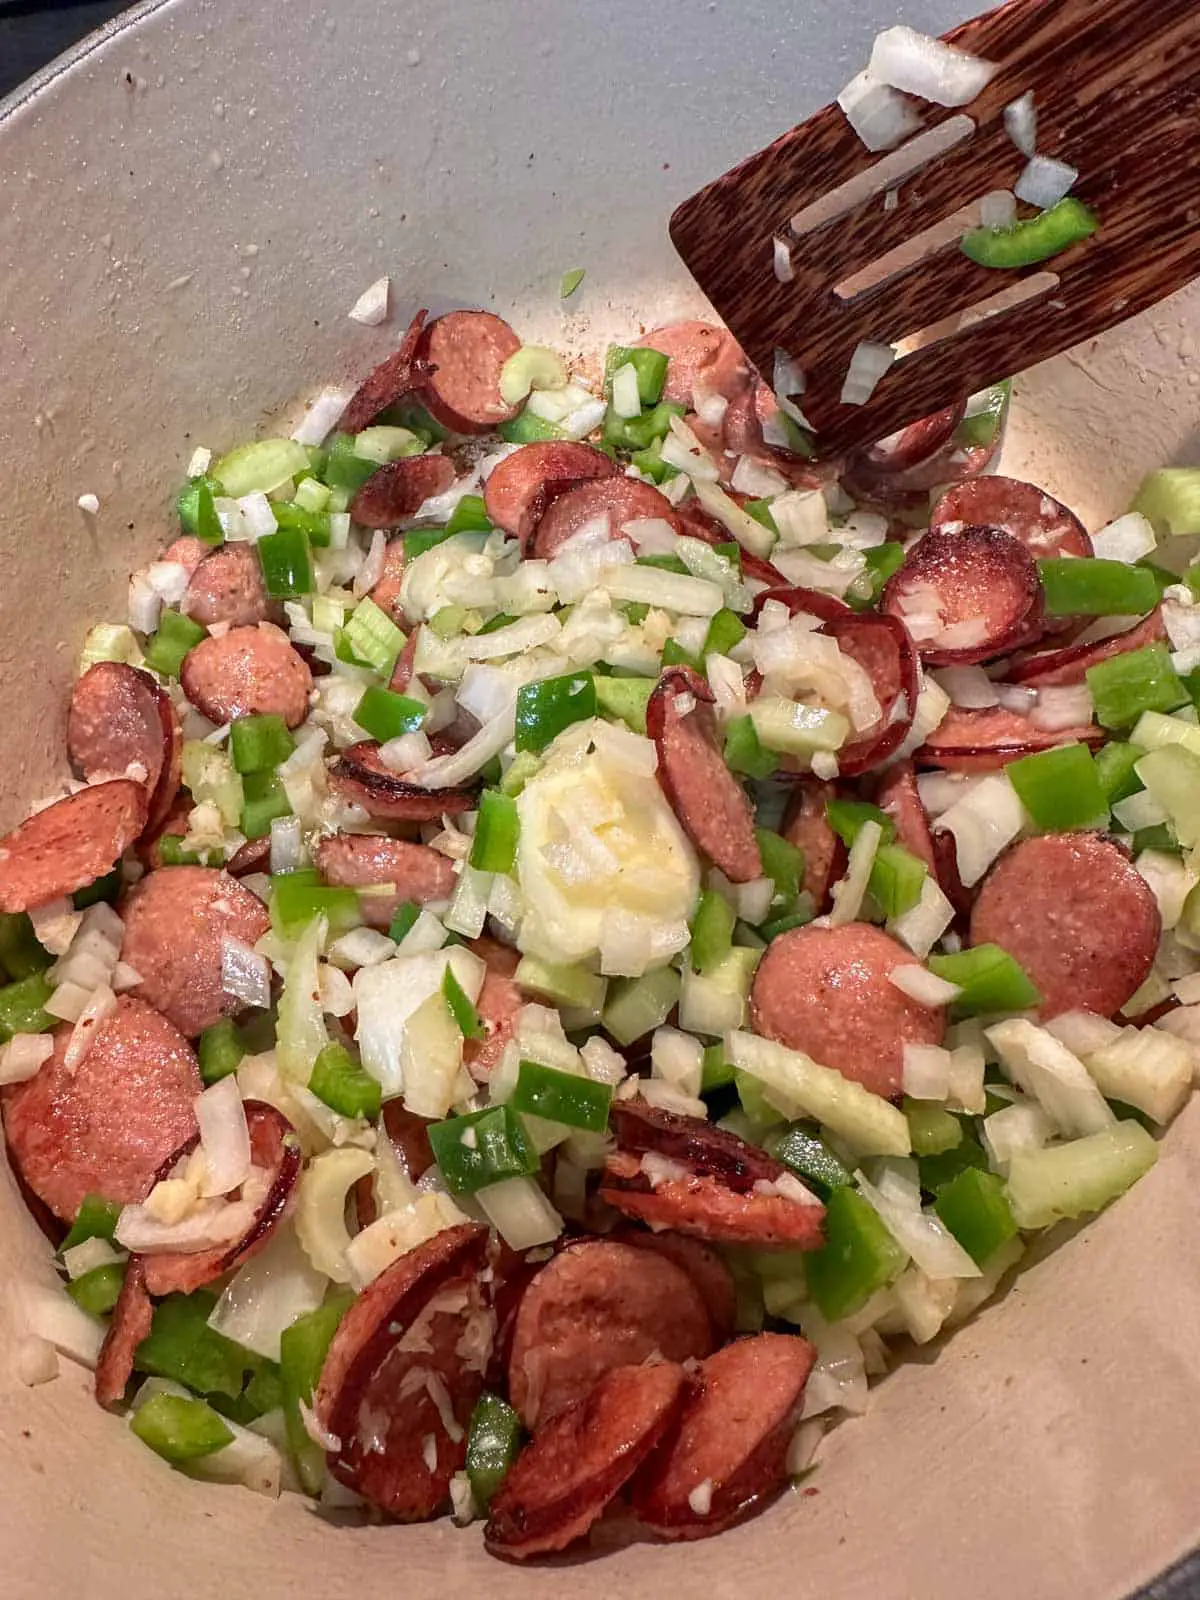 A large pot containing sliced sausage, celery, onion, and green bell pepper. There is a wooden spoon in the pot.